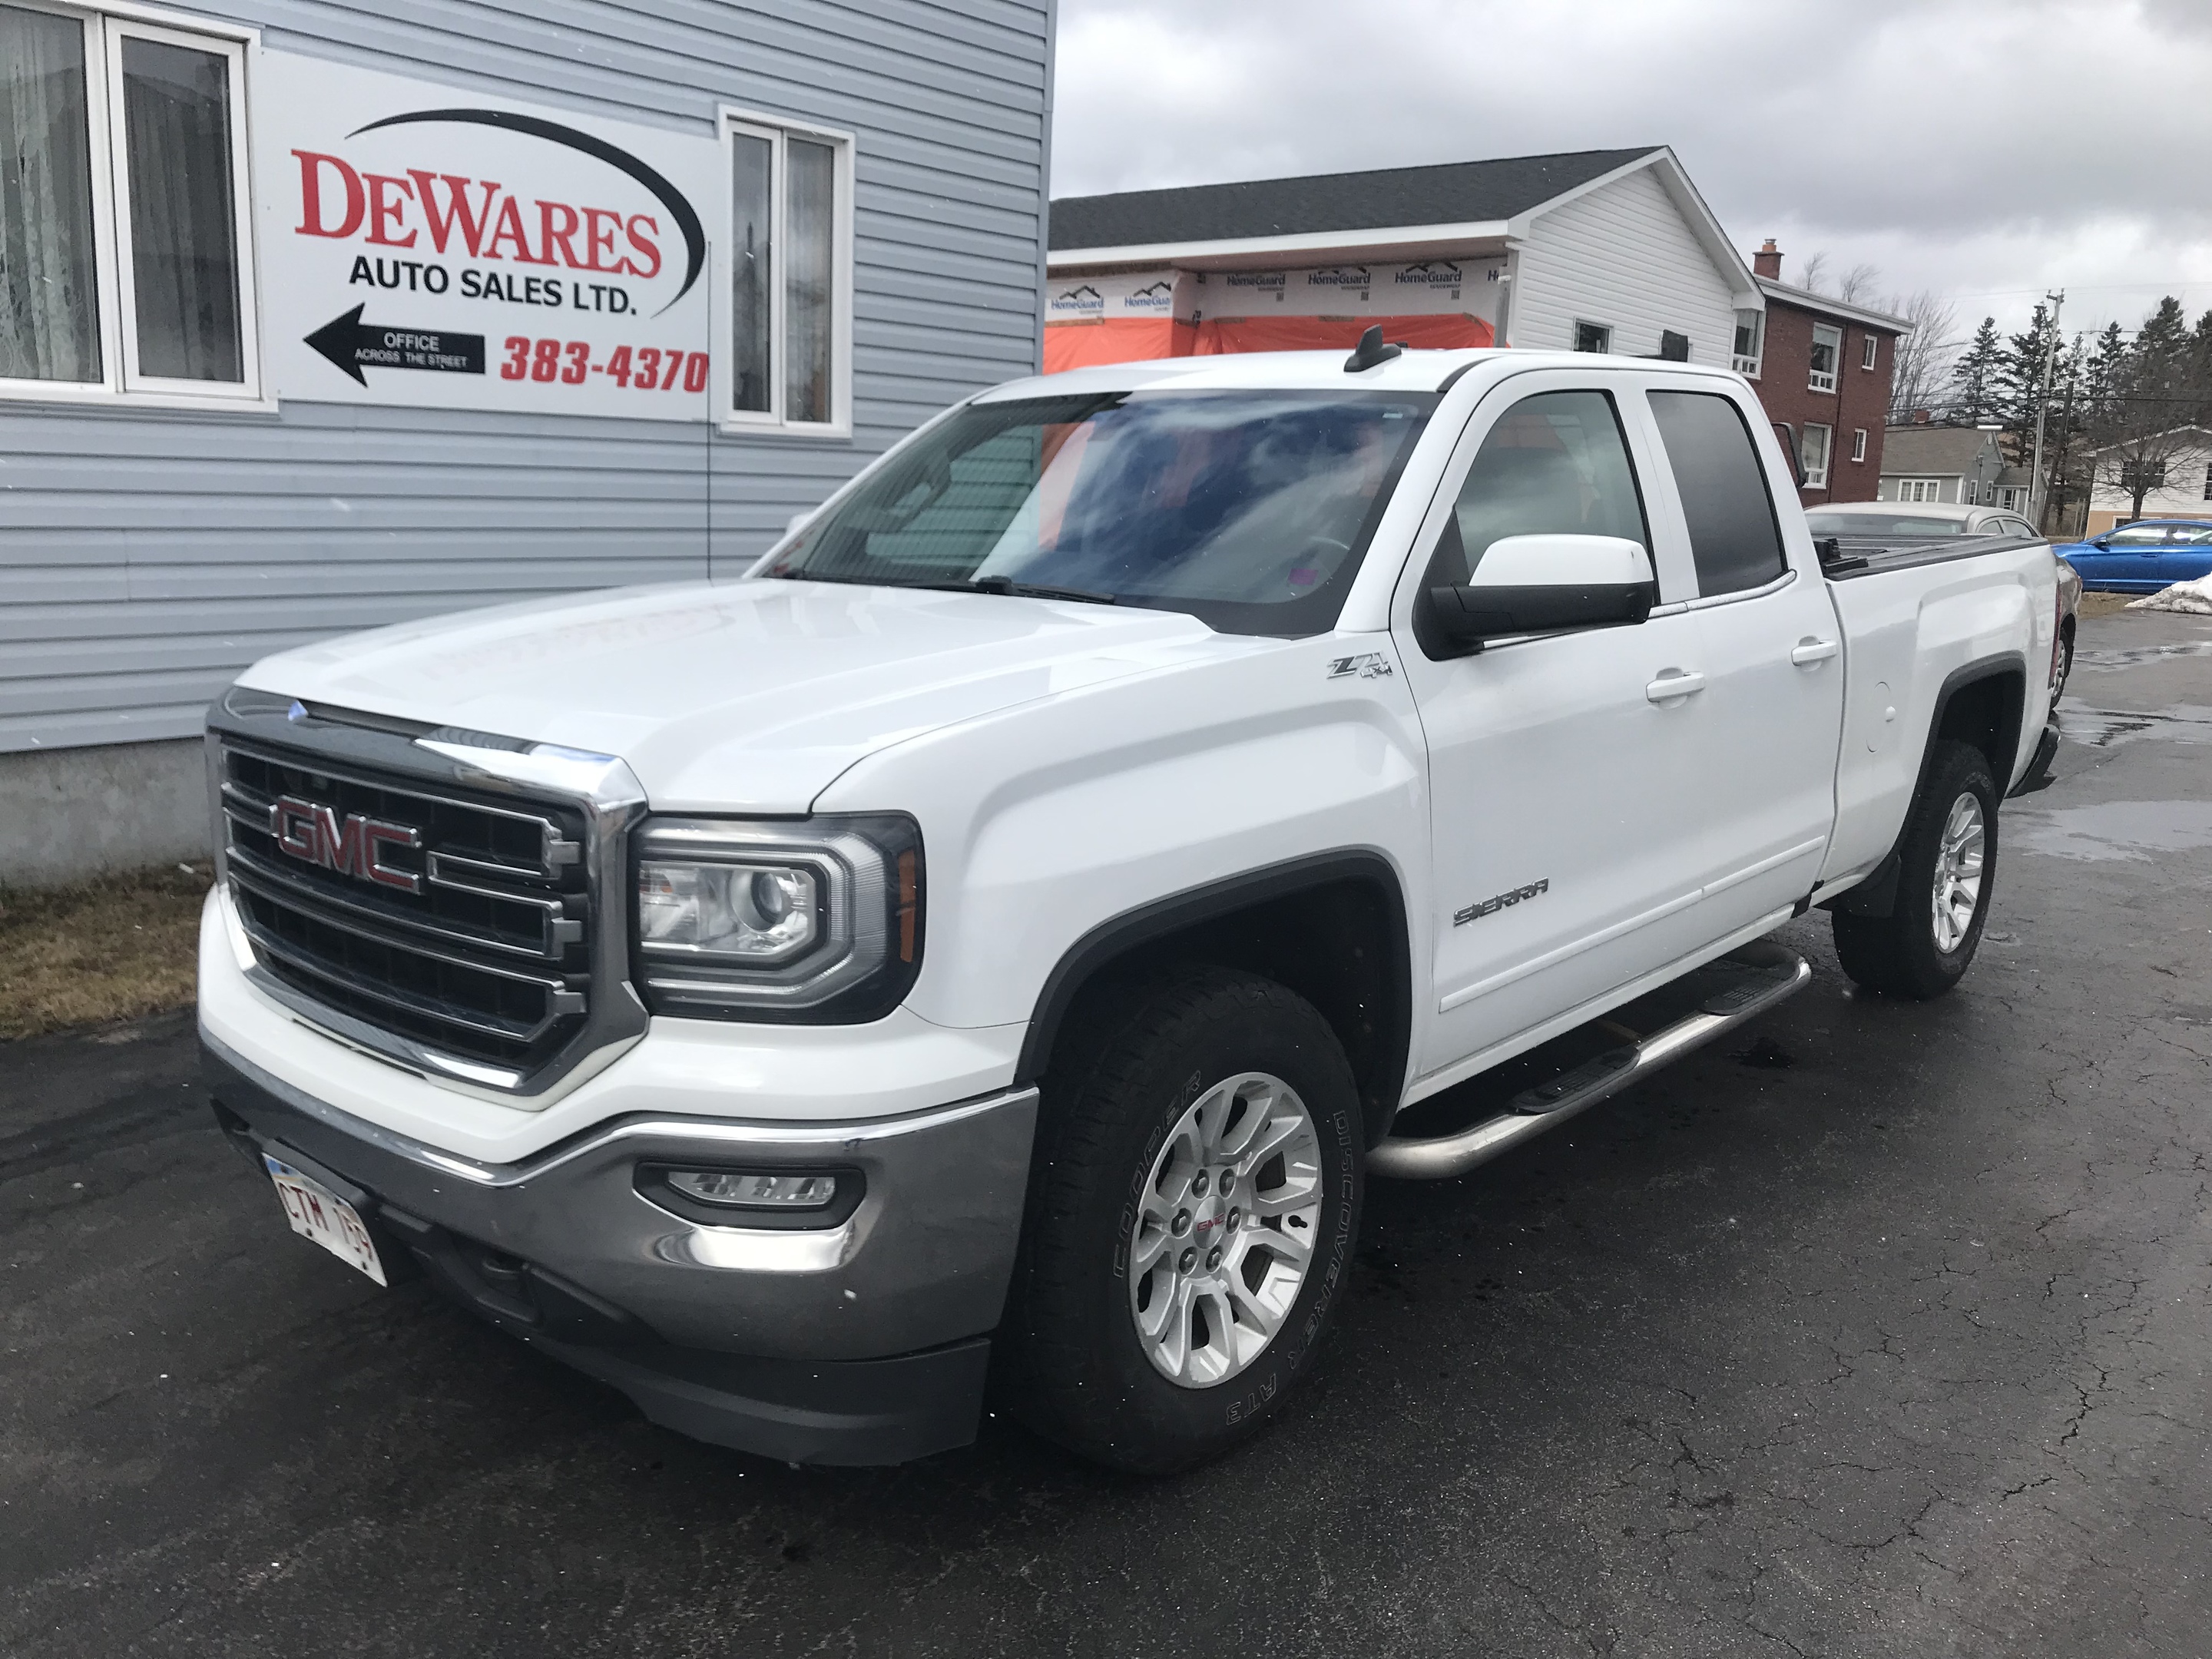 2017 GMC Sierra 1500 - 4WD Double Cab 143.5  SLE - ONE OWNER !!!